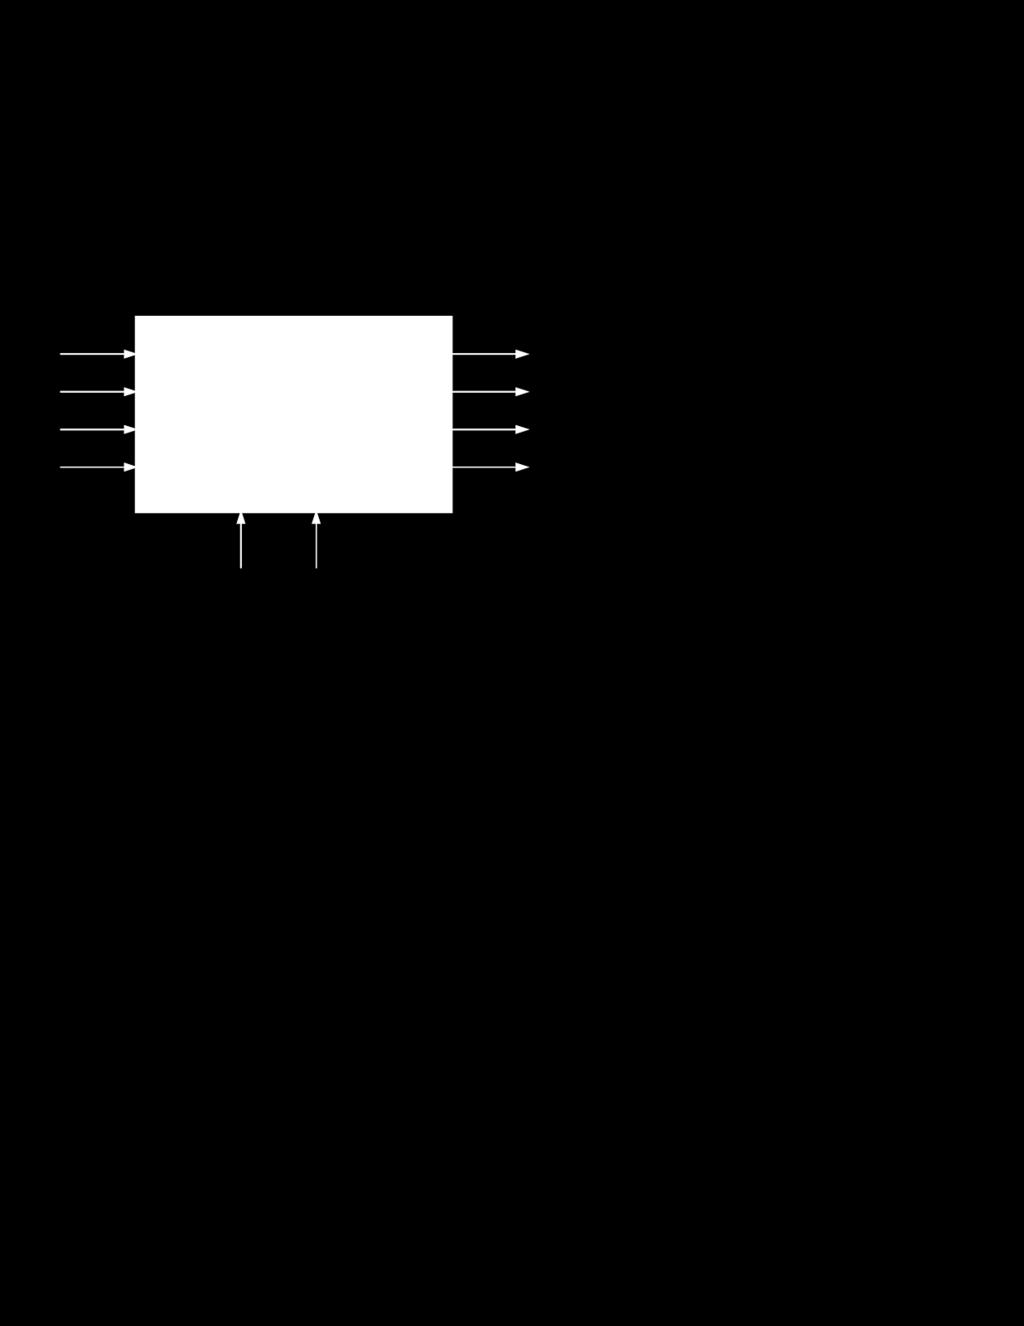 1.3 Level-0 Description Figure 1 shows the basic input/output functionality to the system.